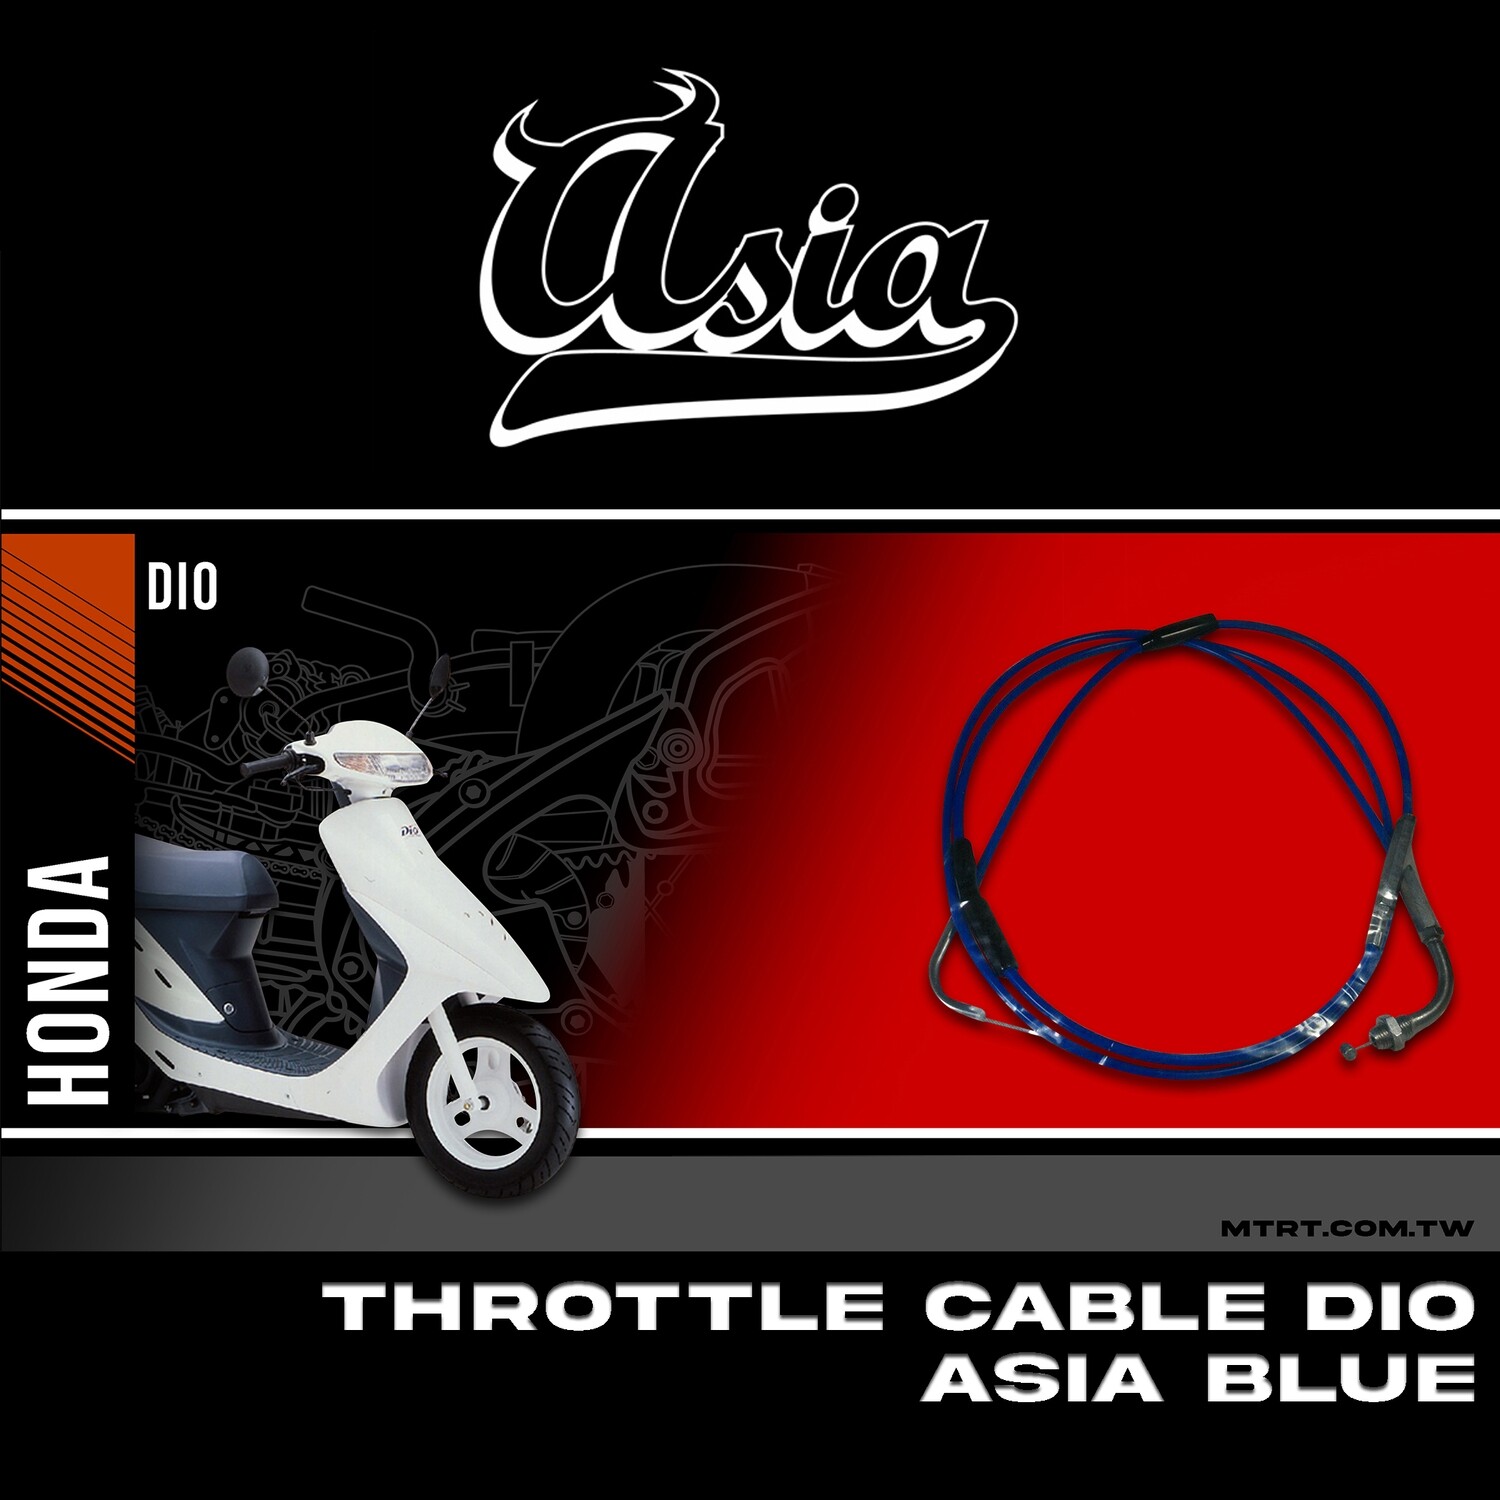 THROTTLE CABLE DIO ASIA